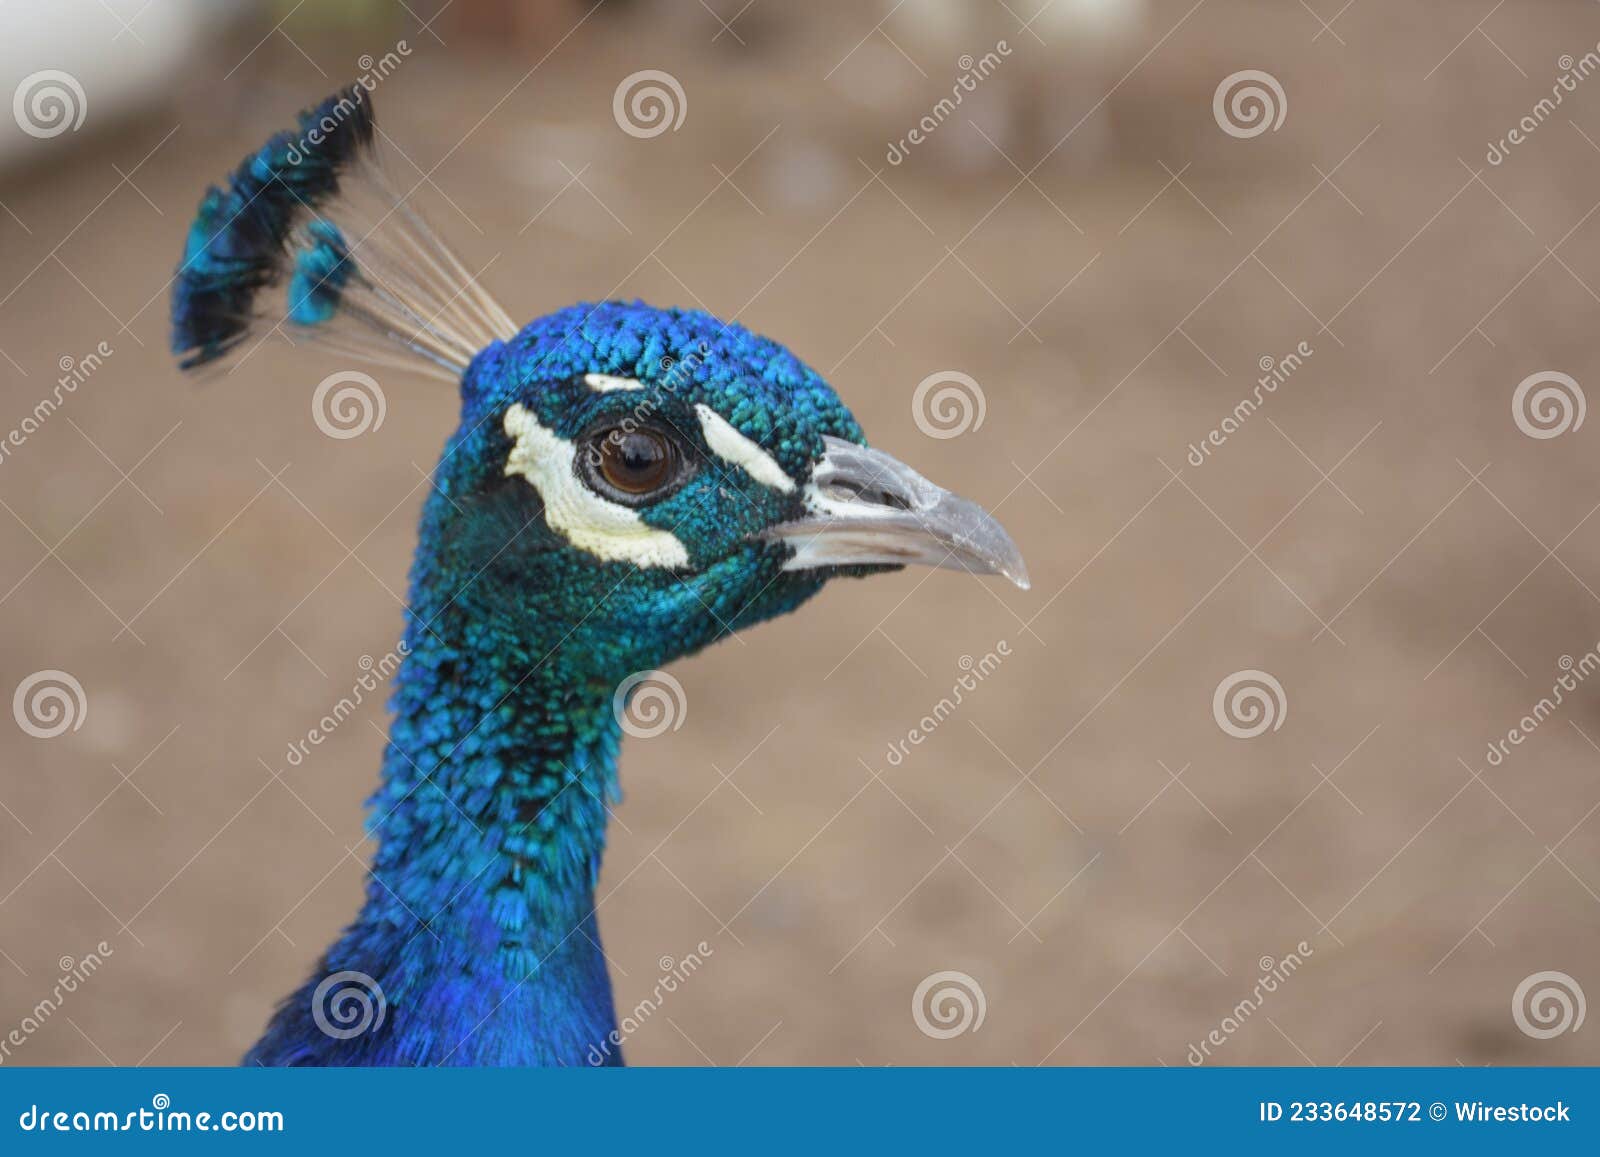 majestic and elegant blue peacock close up